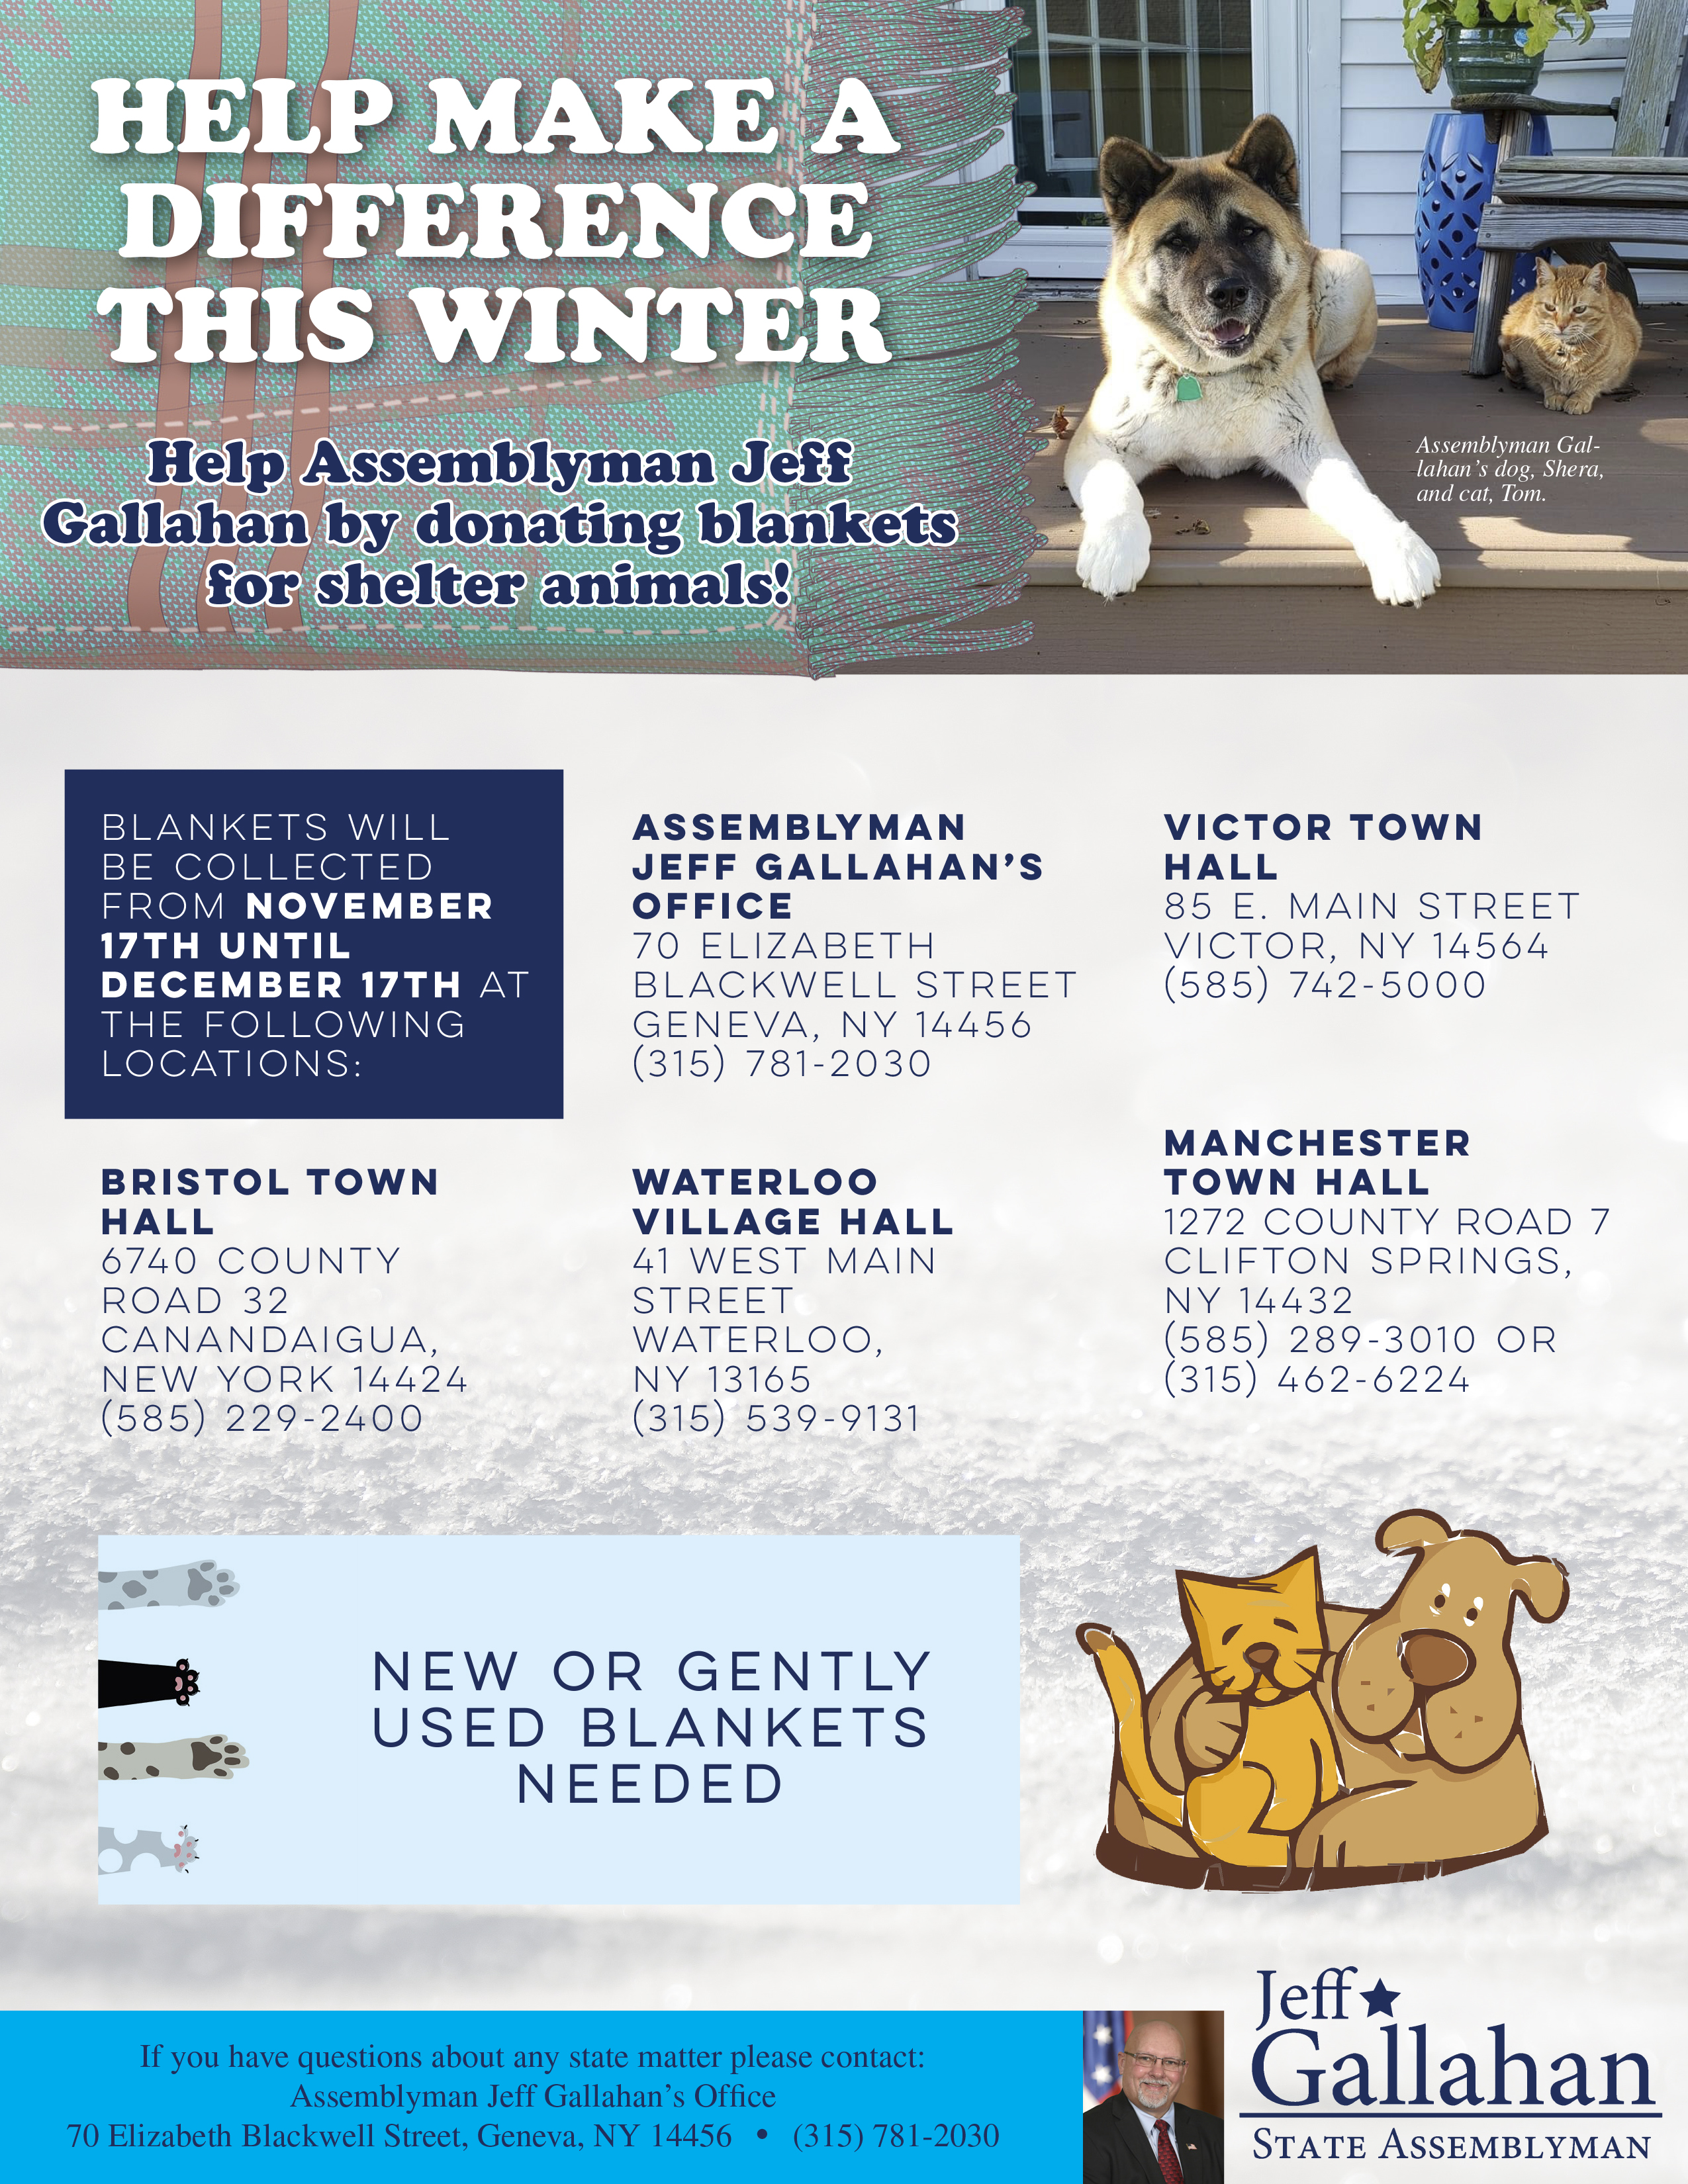 Help Make a Difference this Winter